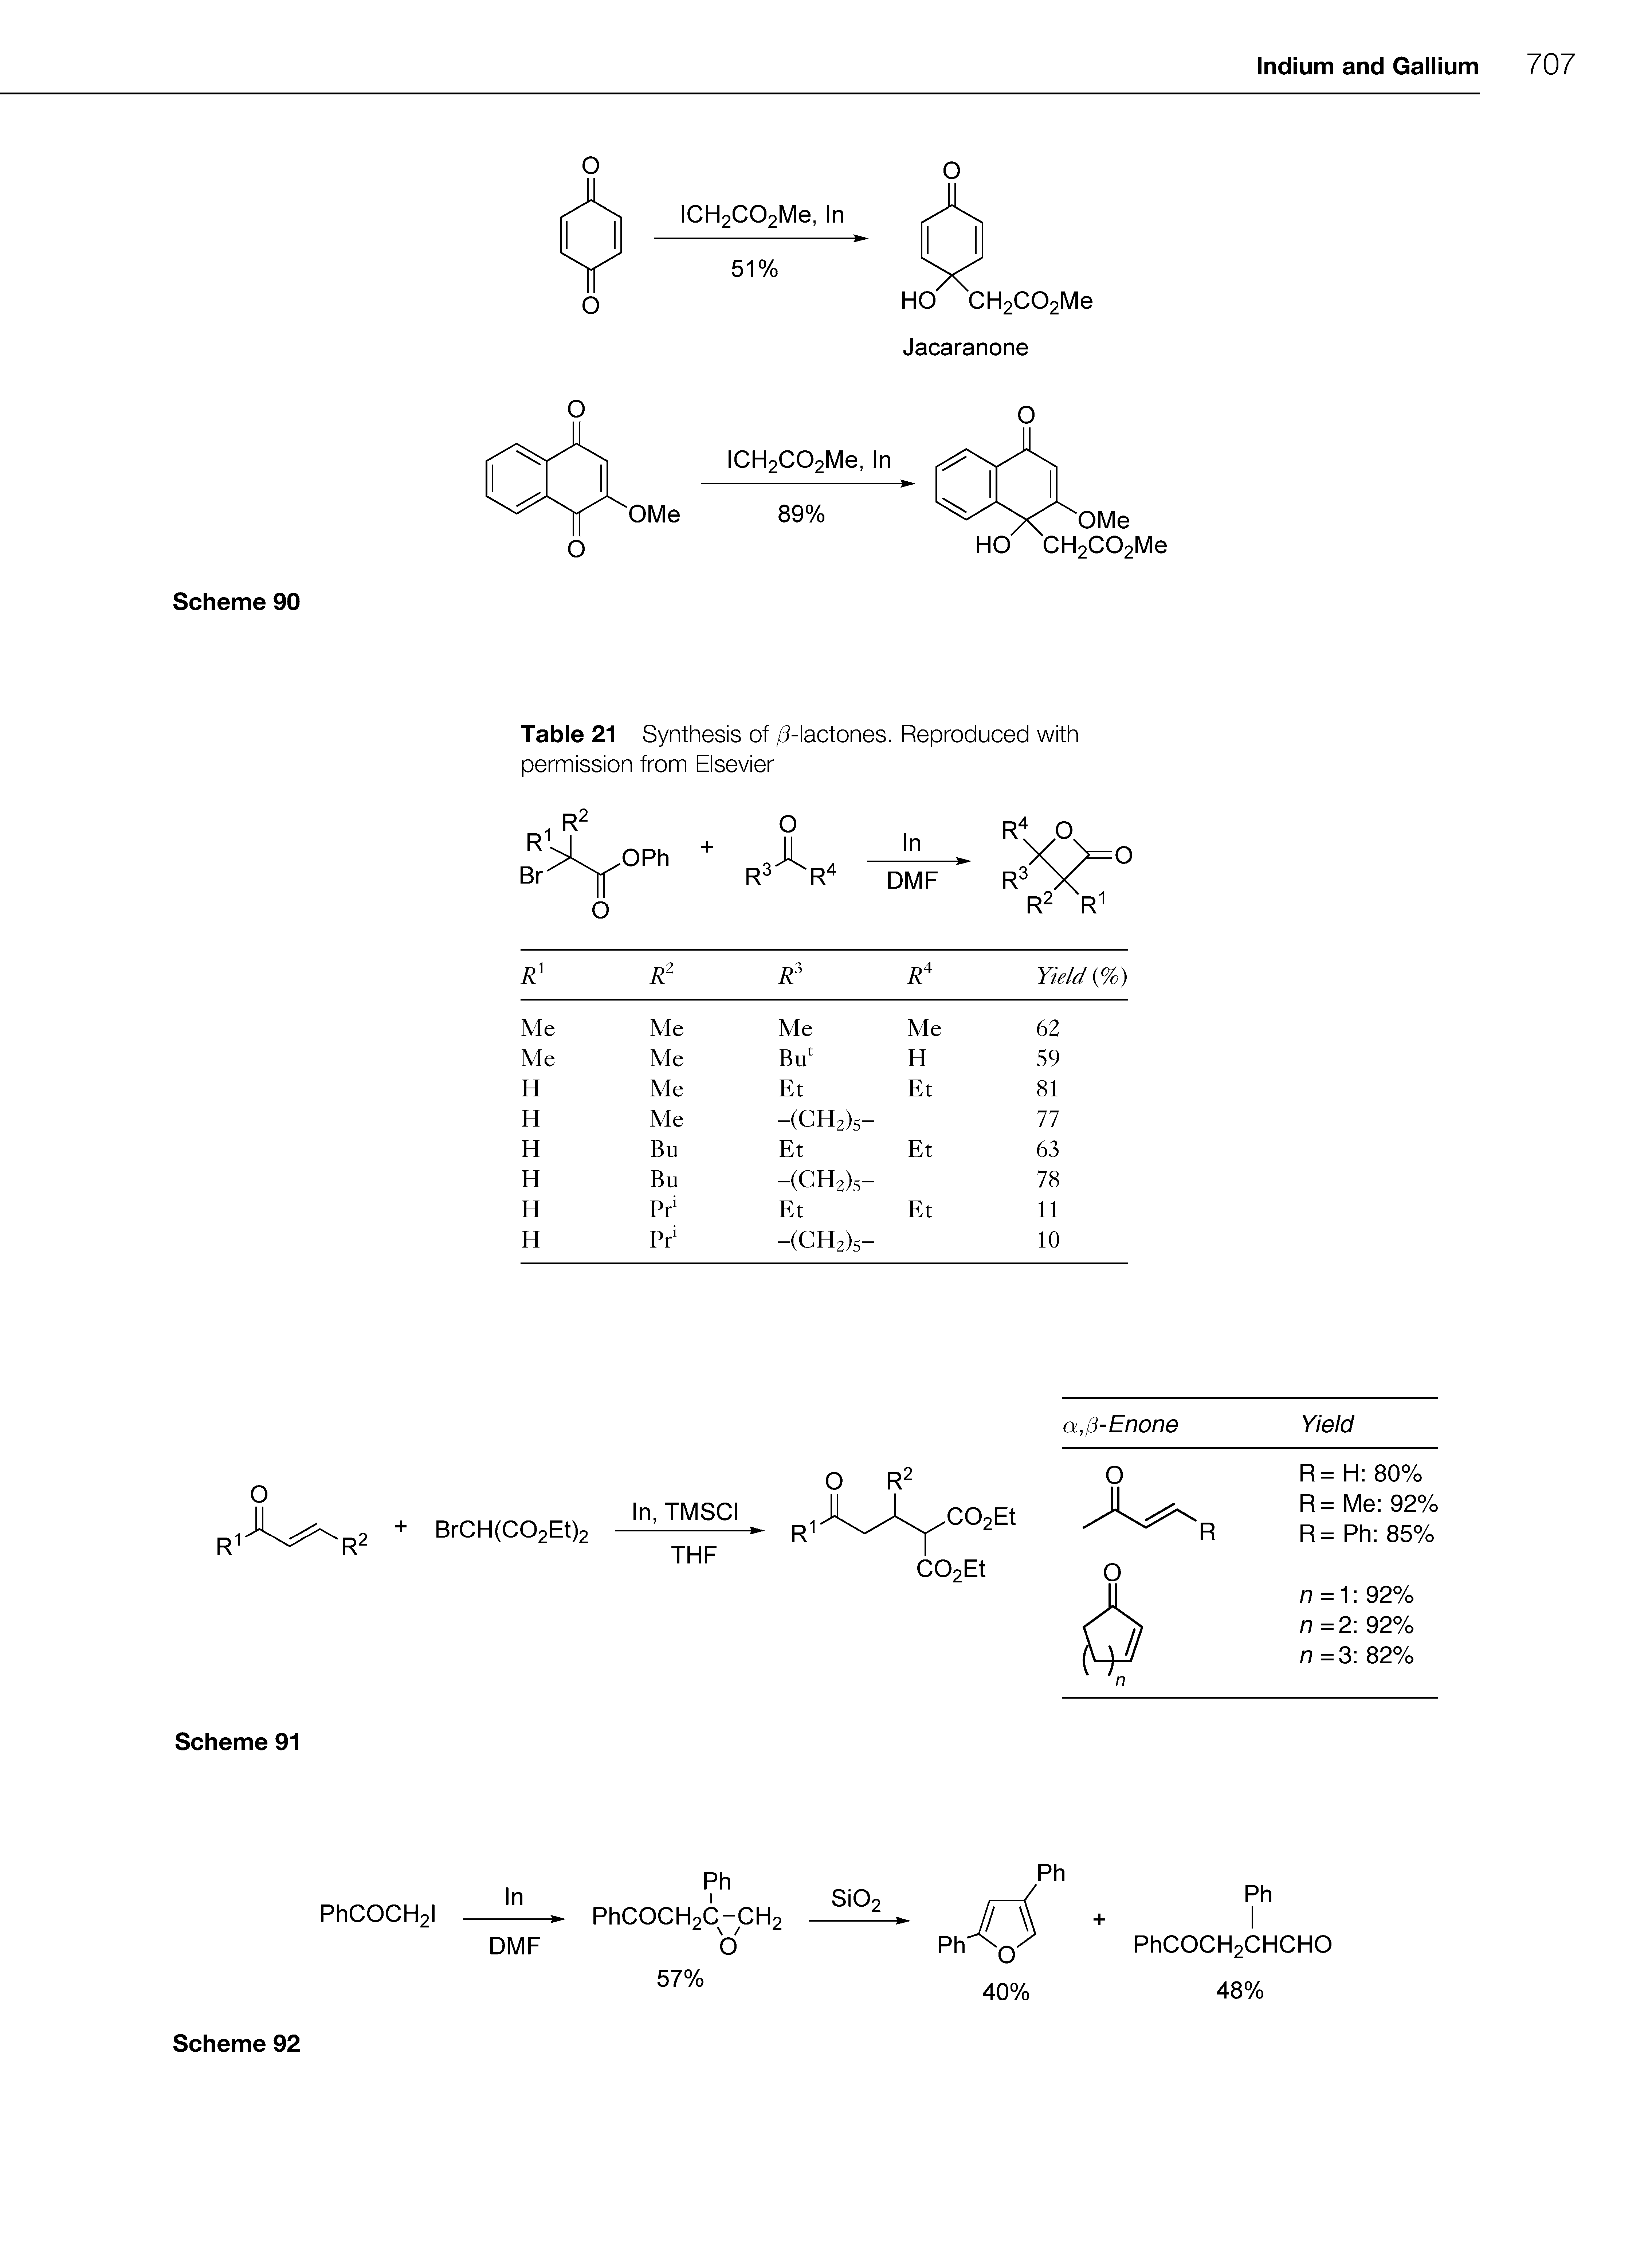 Table 21 Synthesis of /5-lactones. Reproduced with permission from Elsevier...